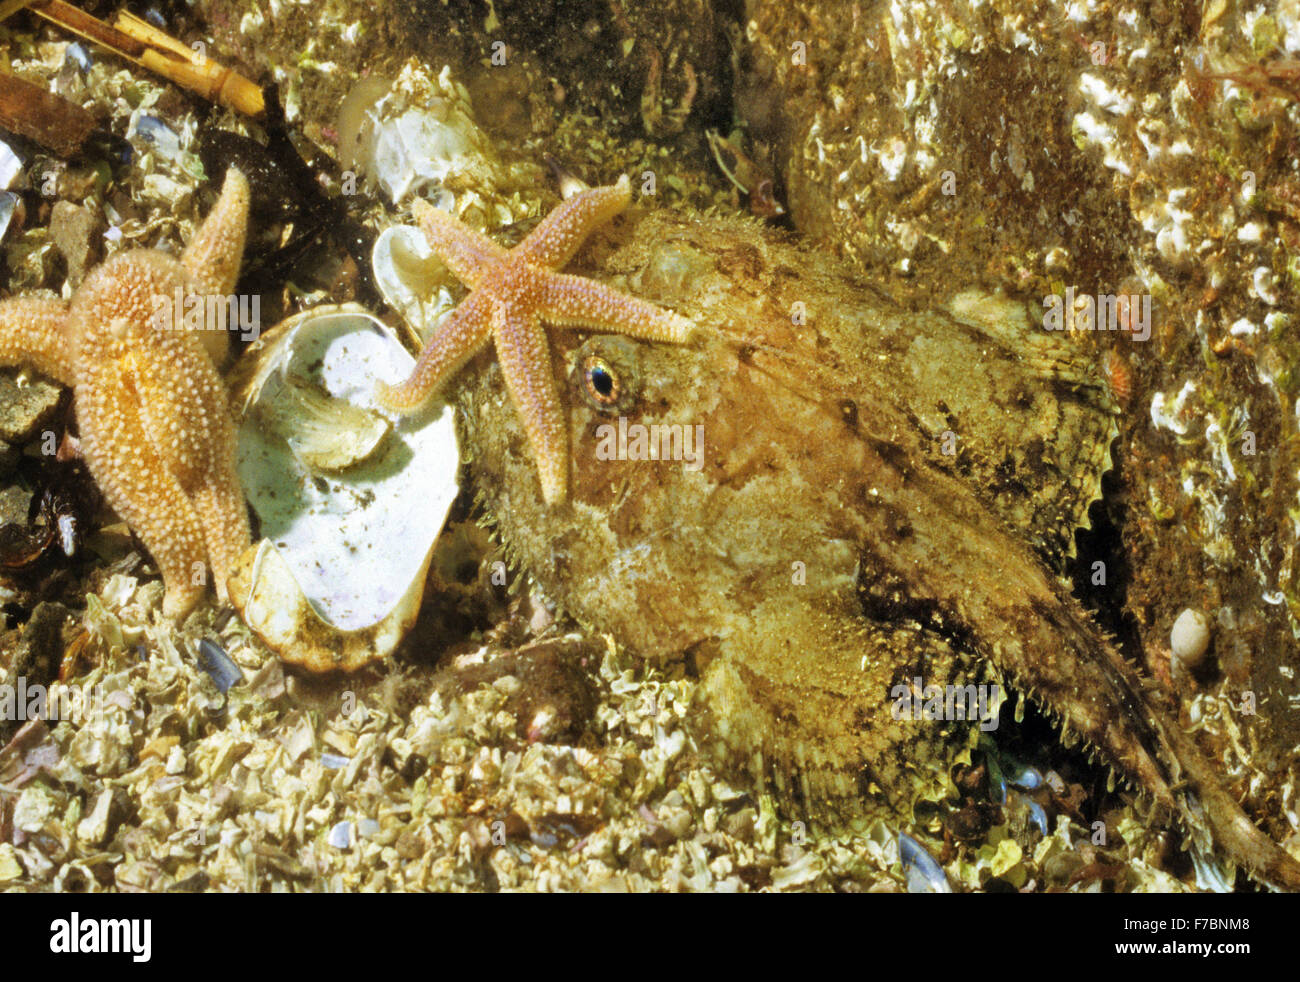 Young Angler fish with a starfish on its nose. Image captured underwater at Bass Rock Scotland. Stock Photo